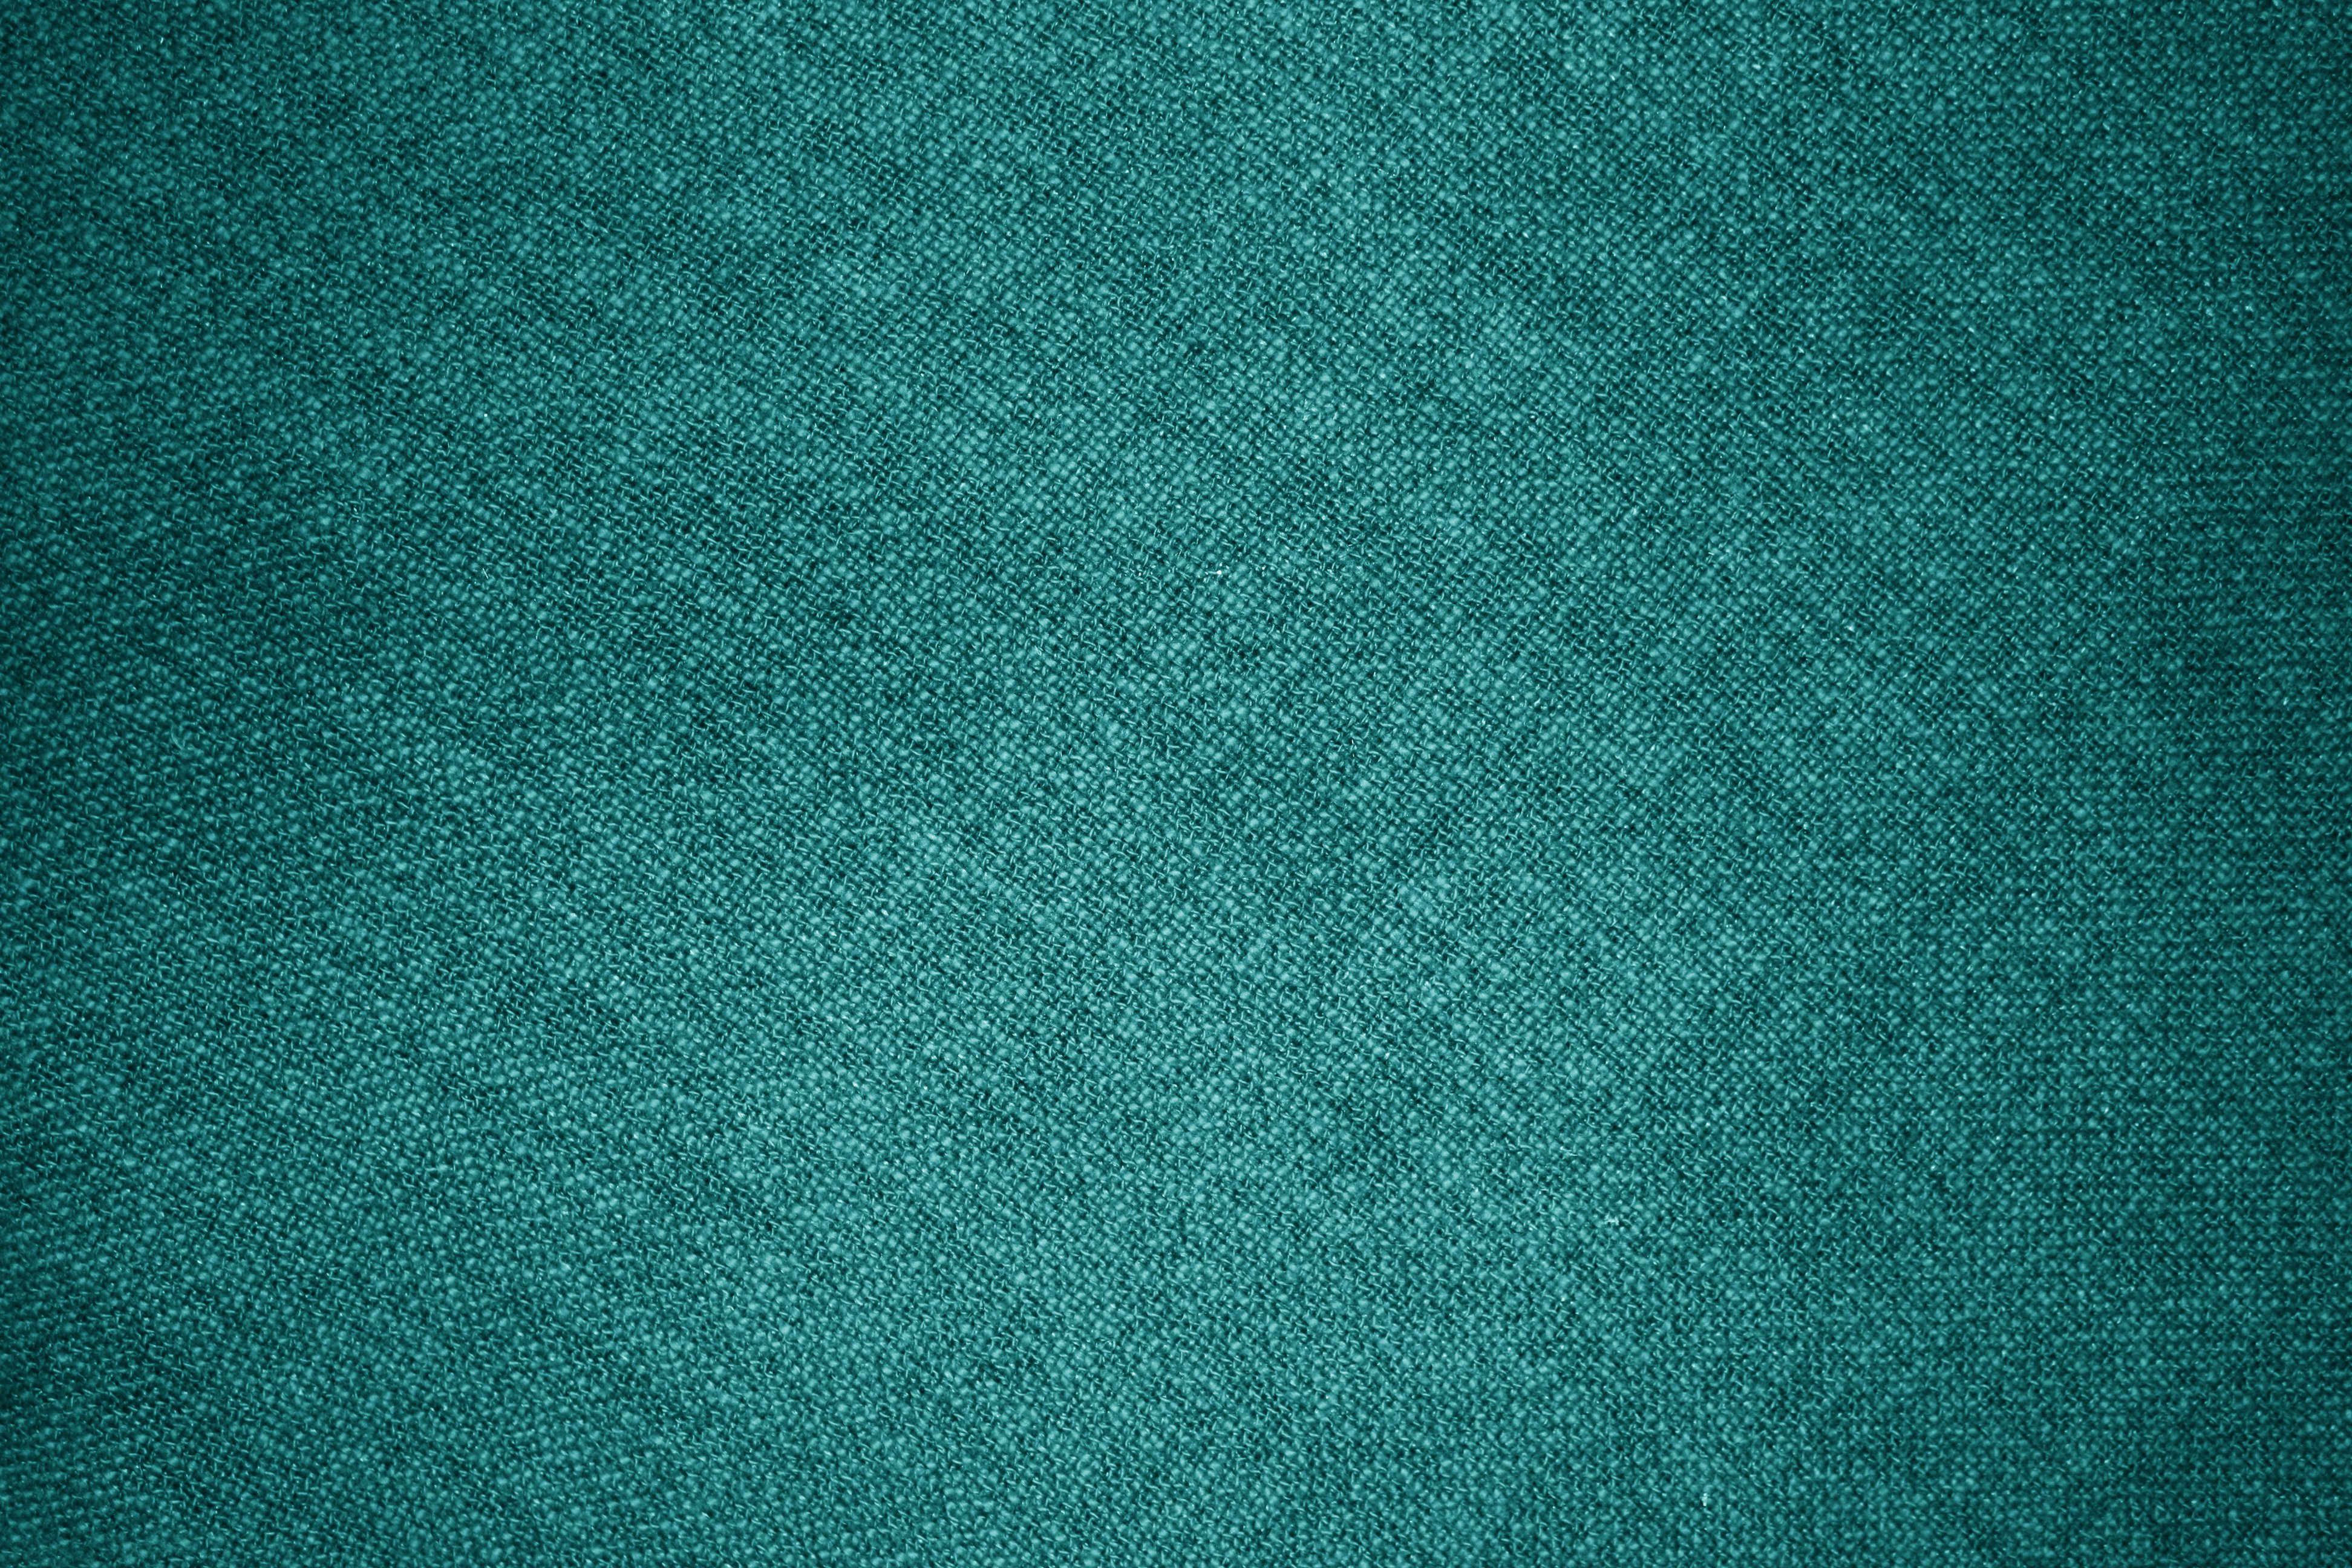 Teal Fabric Texture Picture | Free Photograph | Photos Public Domain